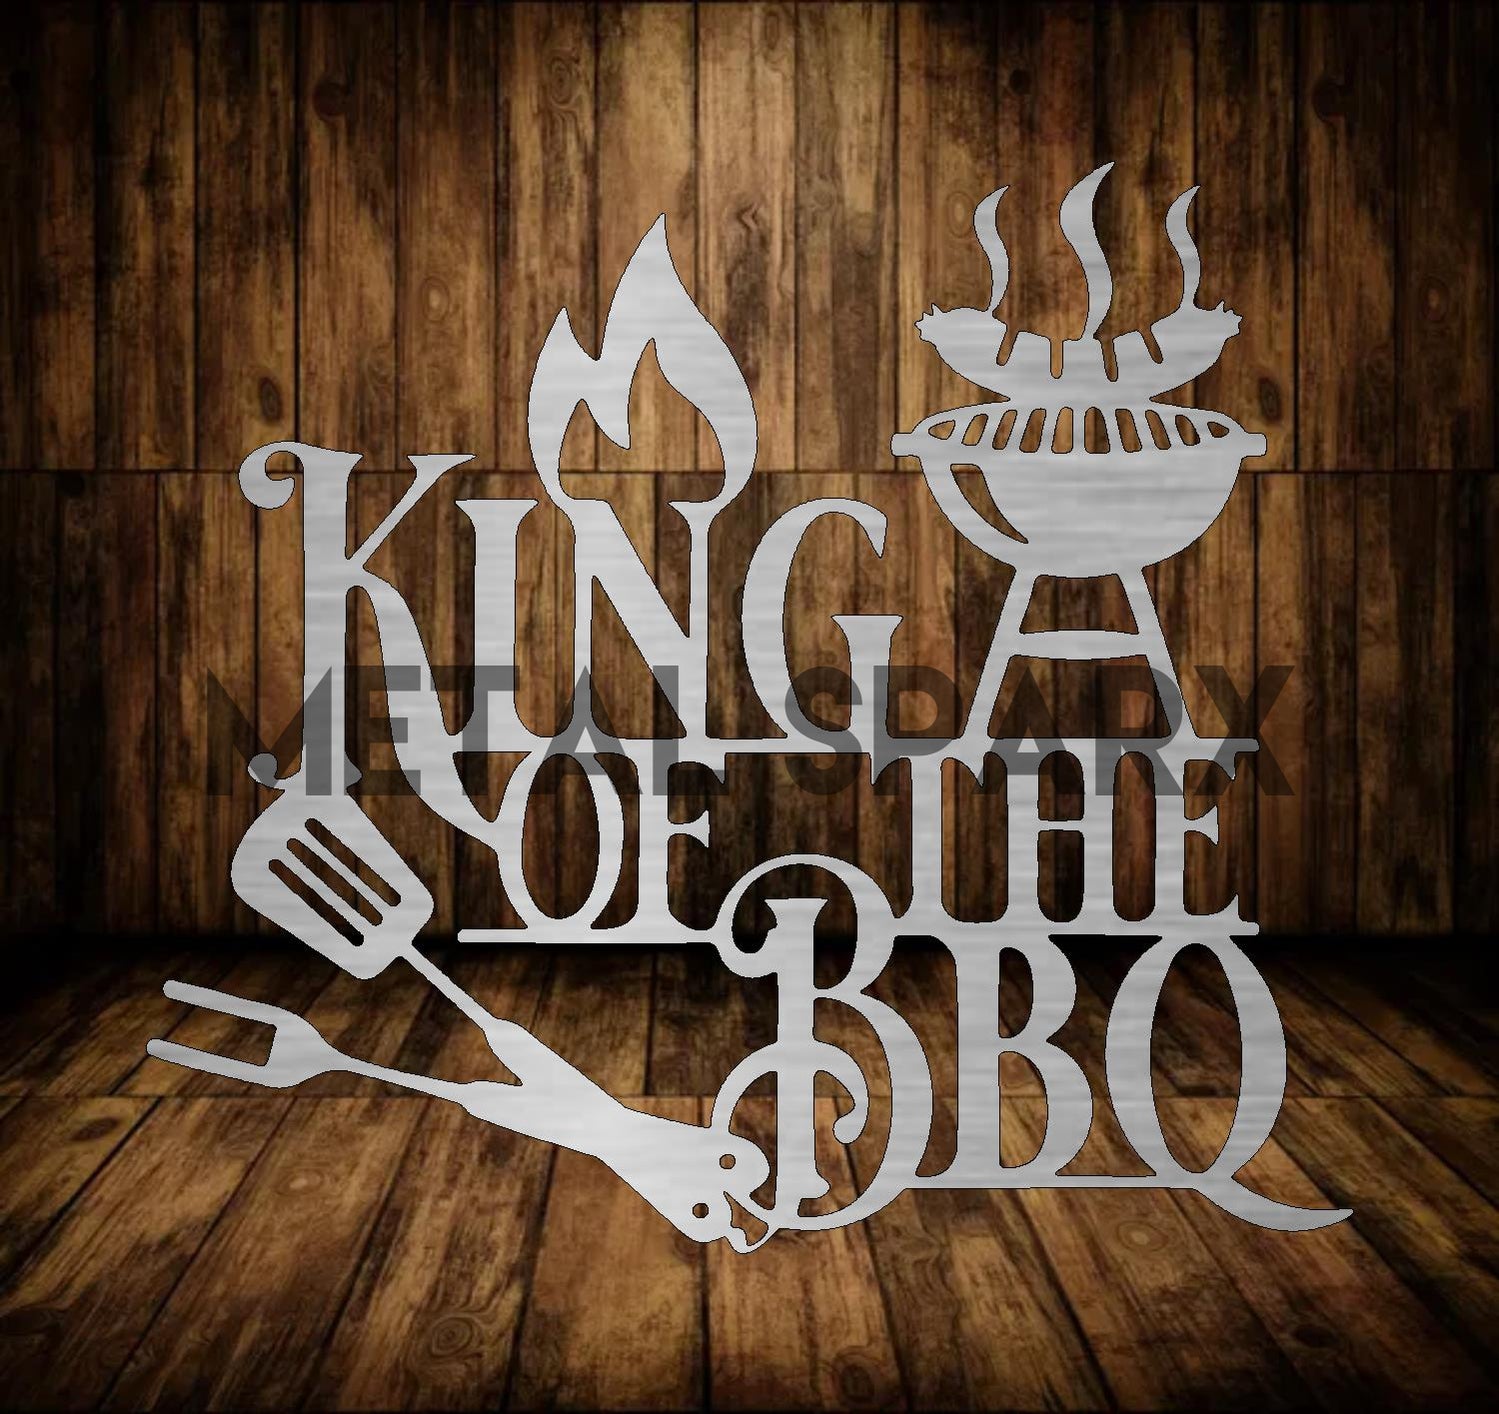 King of the BBQ